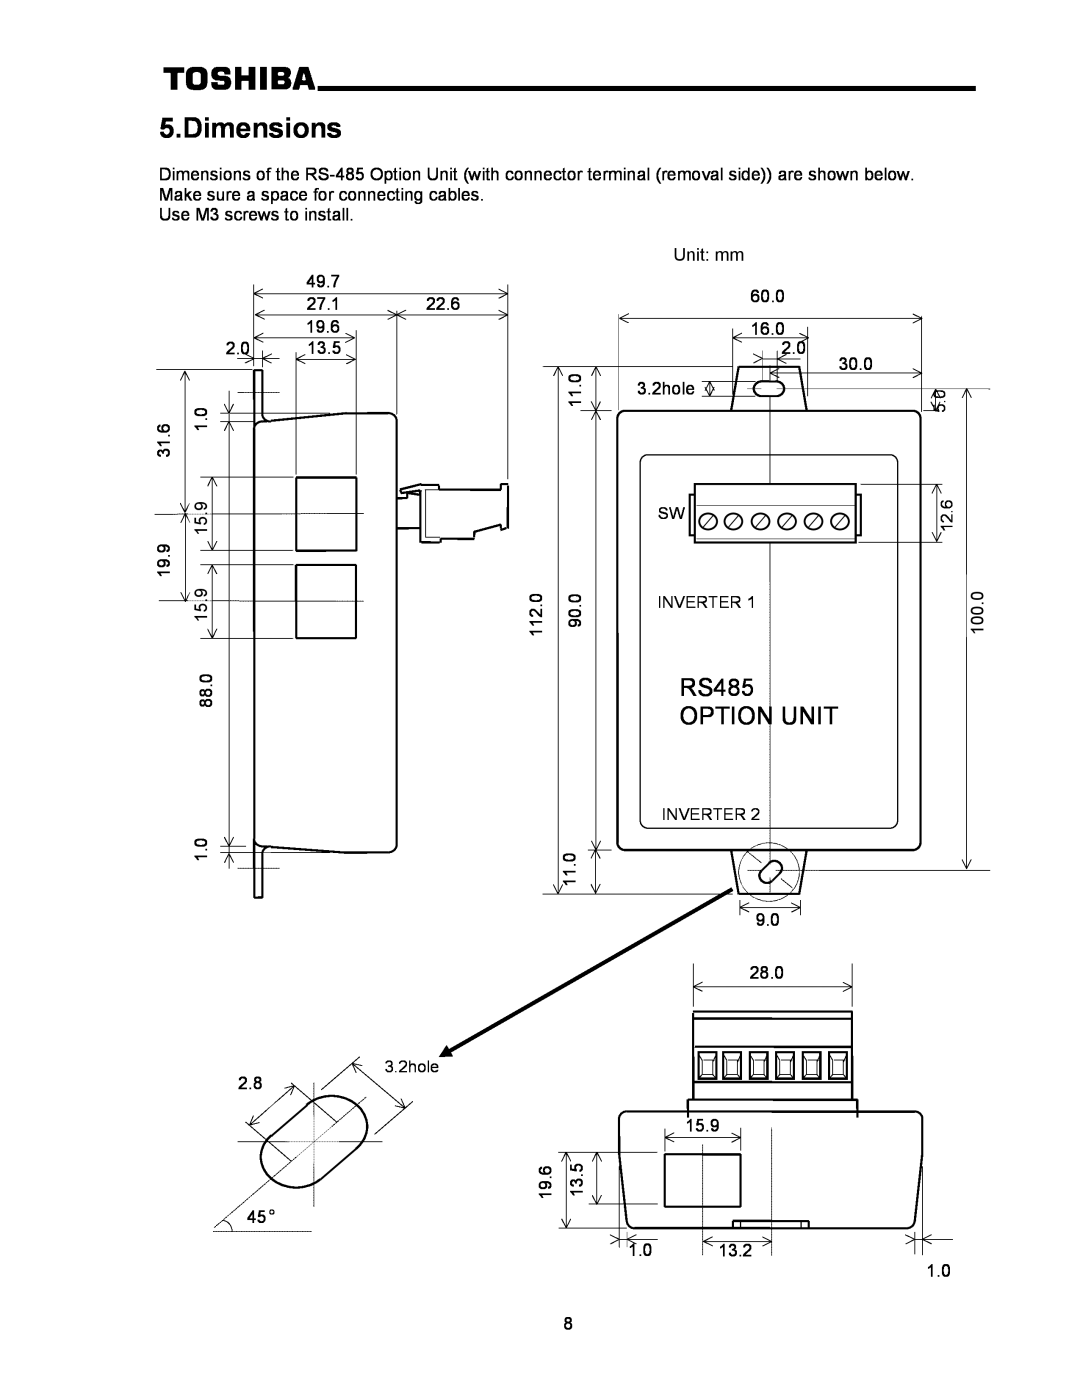 Toshiba RS-485 operation manual Dimensions, RS485 OPTION UNIT 